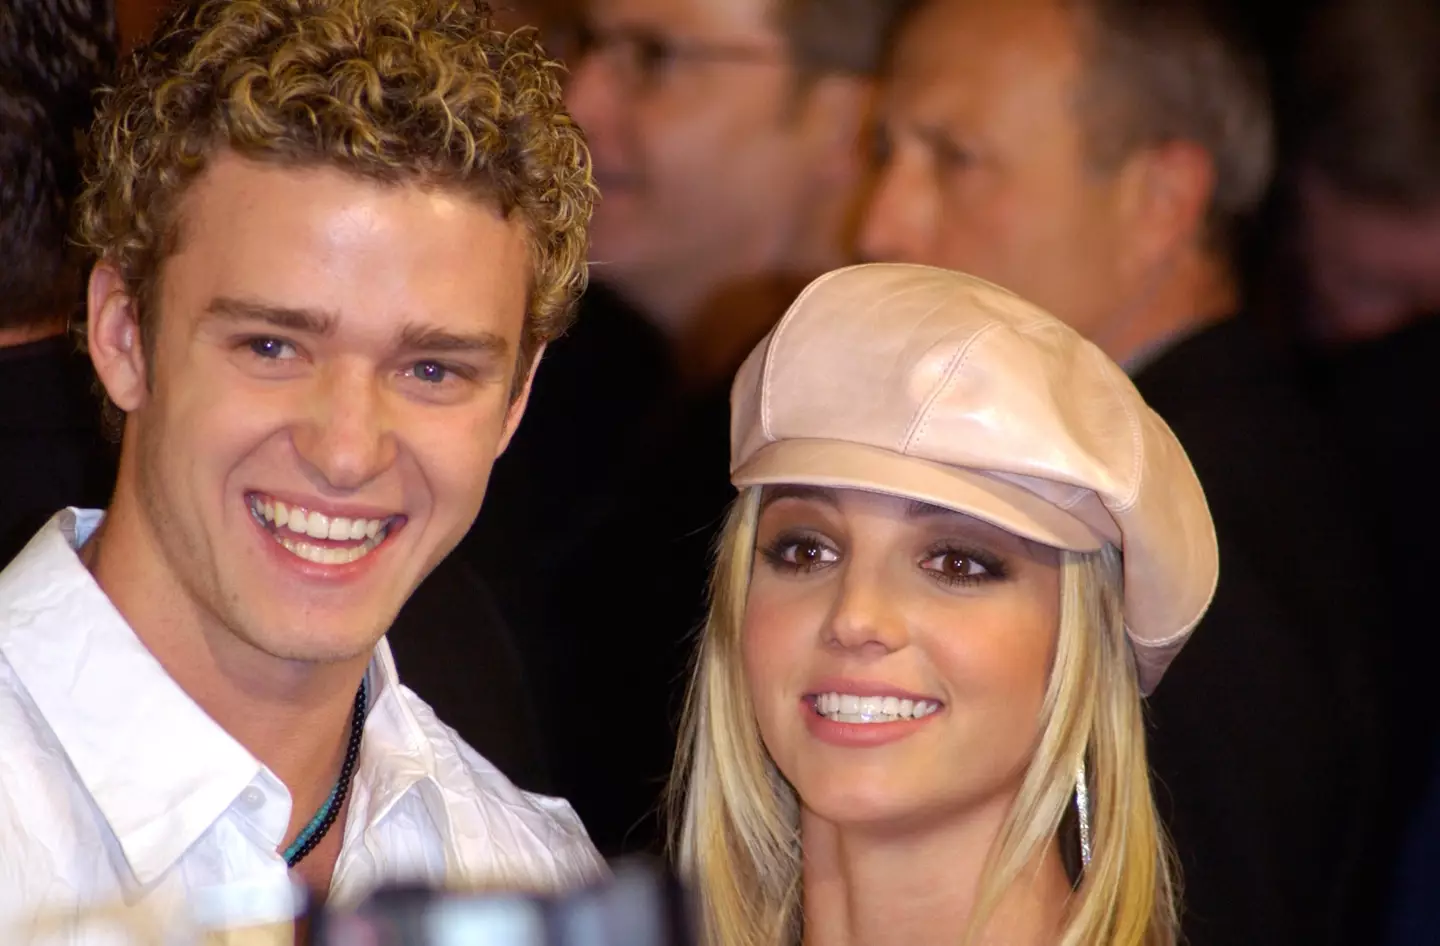 Justin Timberlake and Britney Spears dated in the early 2000s.